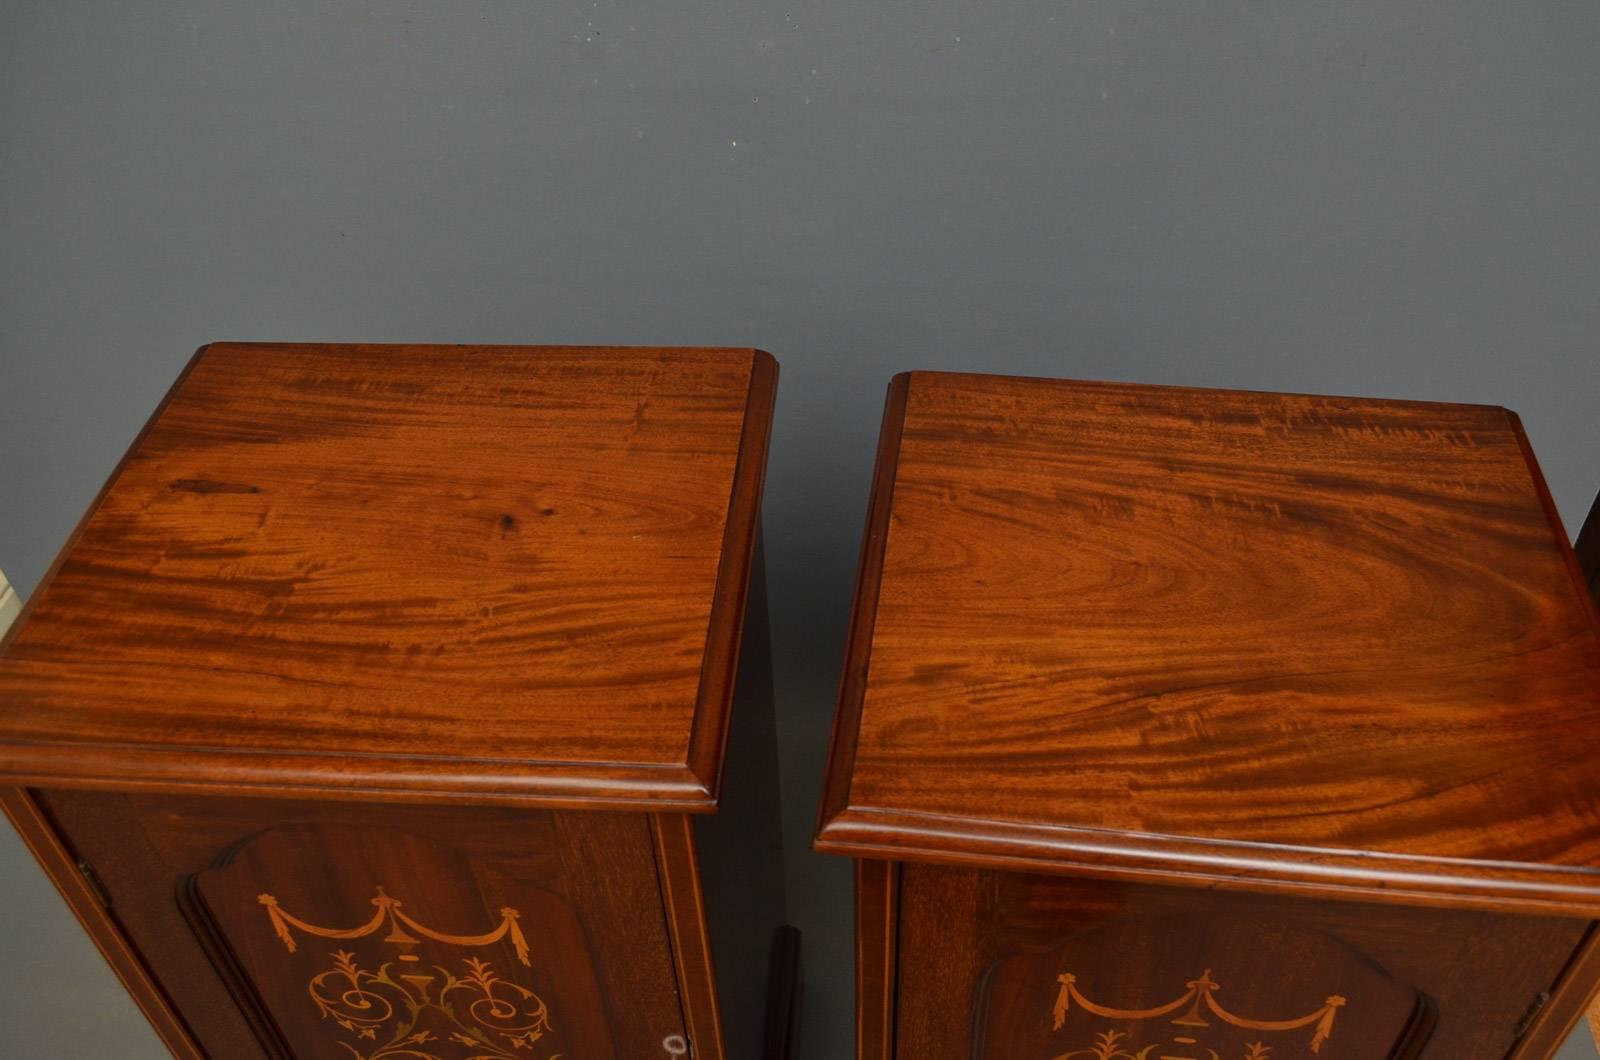 Sn4163, pair of Edwardian mahogany bedside cabinets each having moulded top above a panelled door fitted with working lock and key and enclosing a shelf, all standing on plinth base. This antique pair of bedside cabinets is ready to place at home.